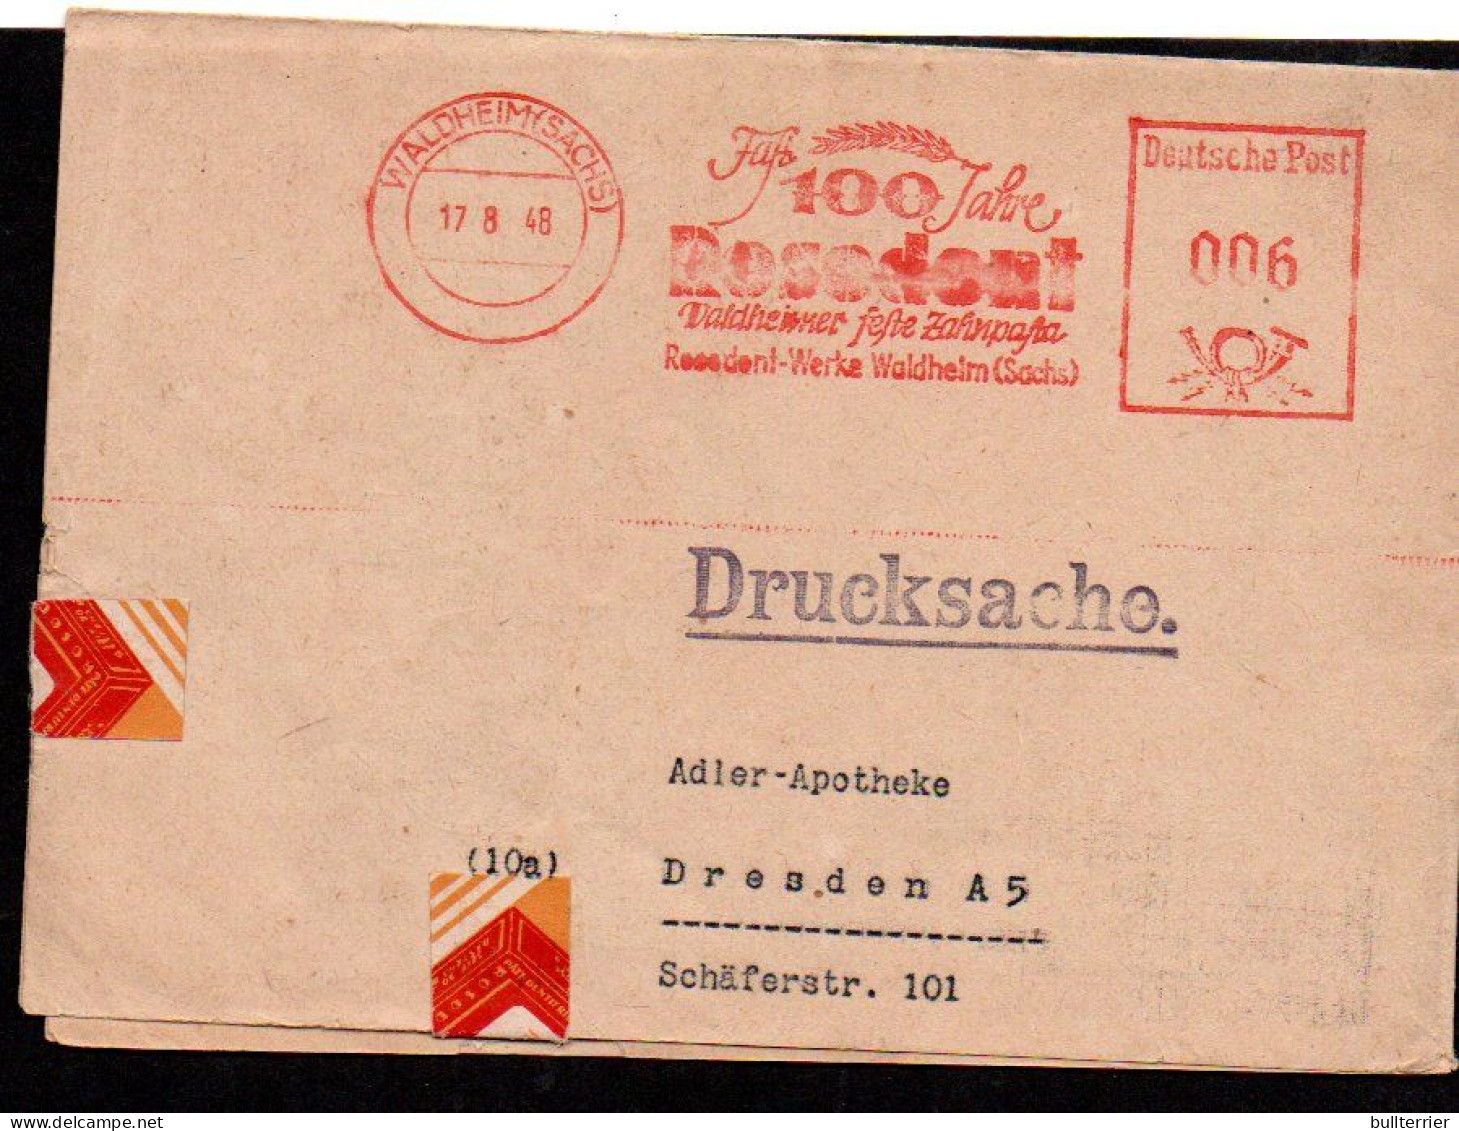 DENISTRY -  GERMANY - 1948 - COVER WALDHEIM TO DRESDEN WITH SLOGAN CANCELLATION - Médecine